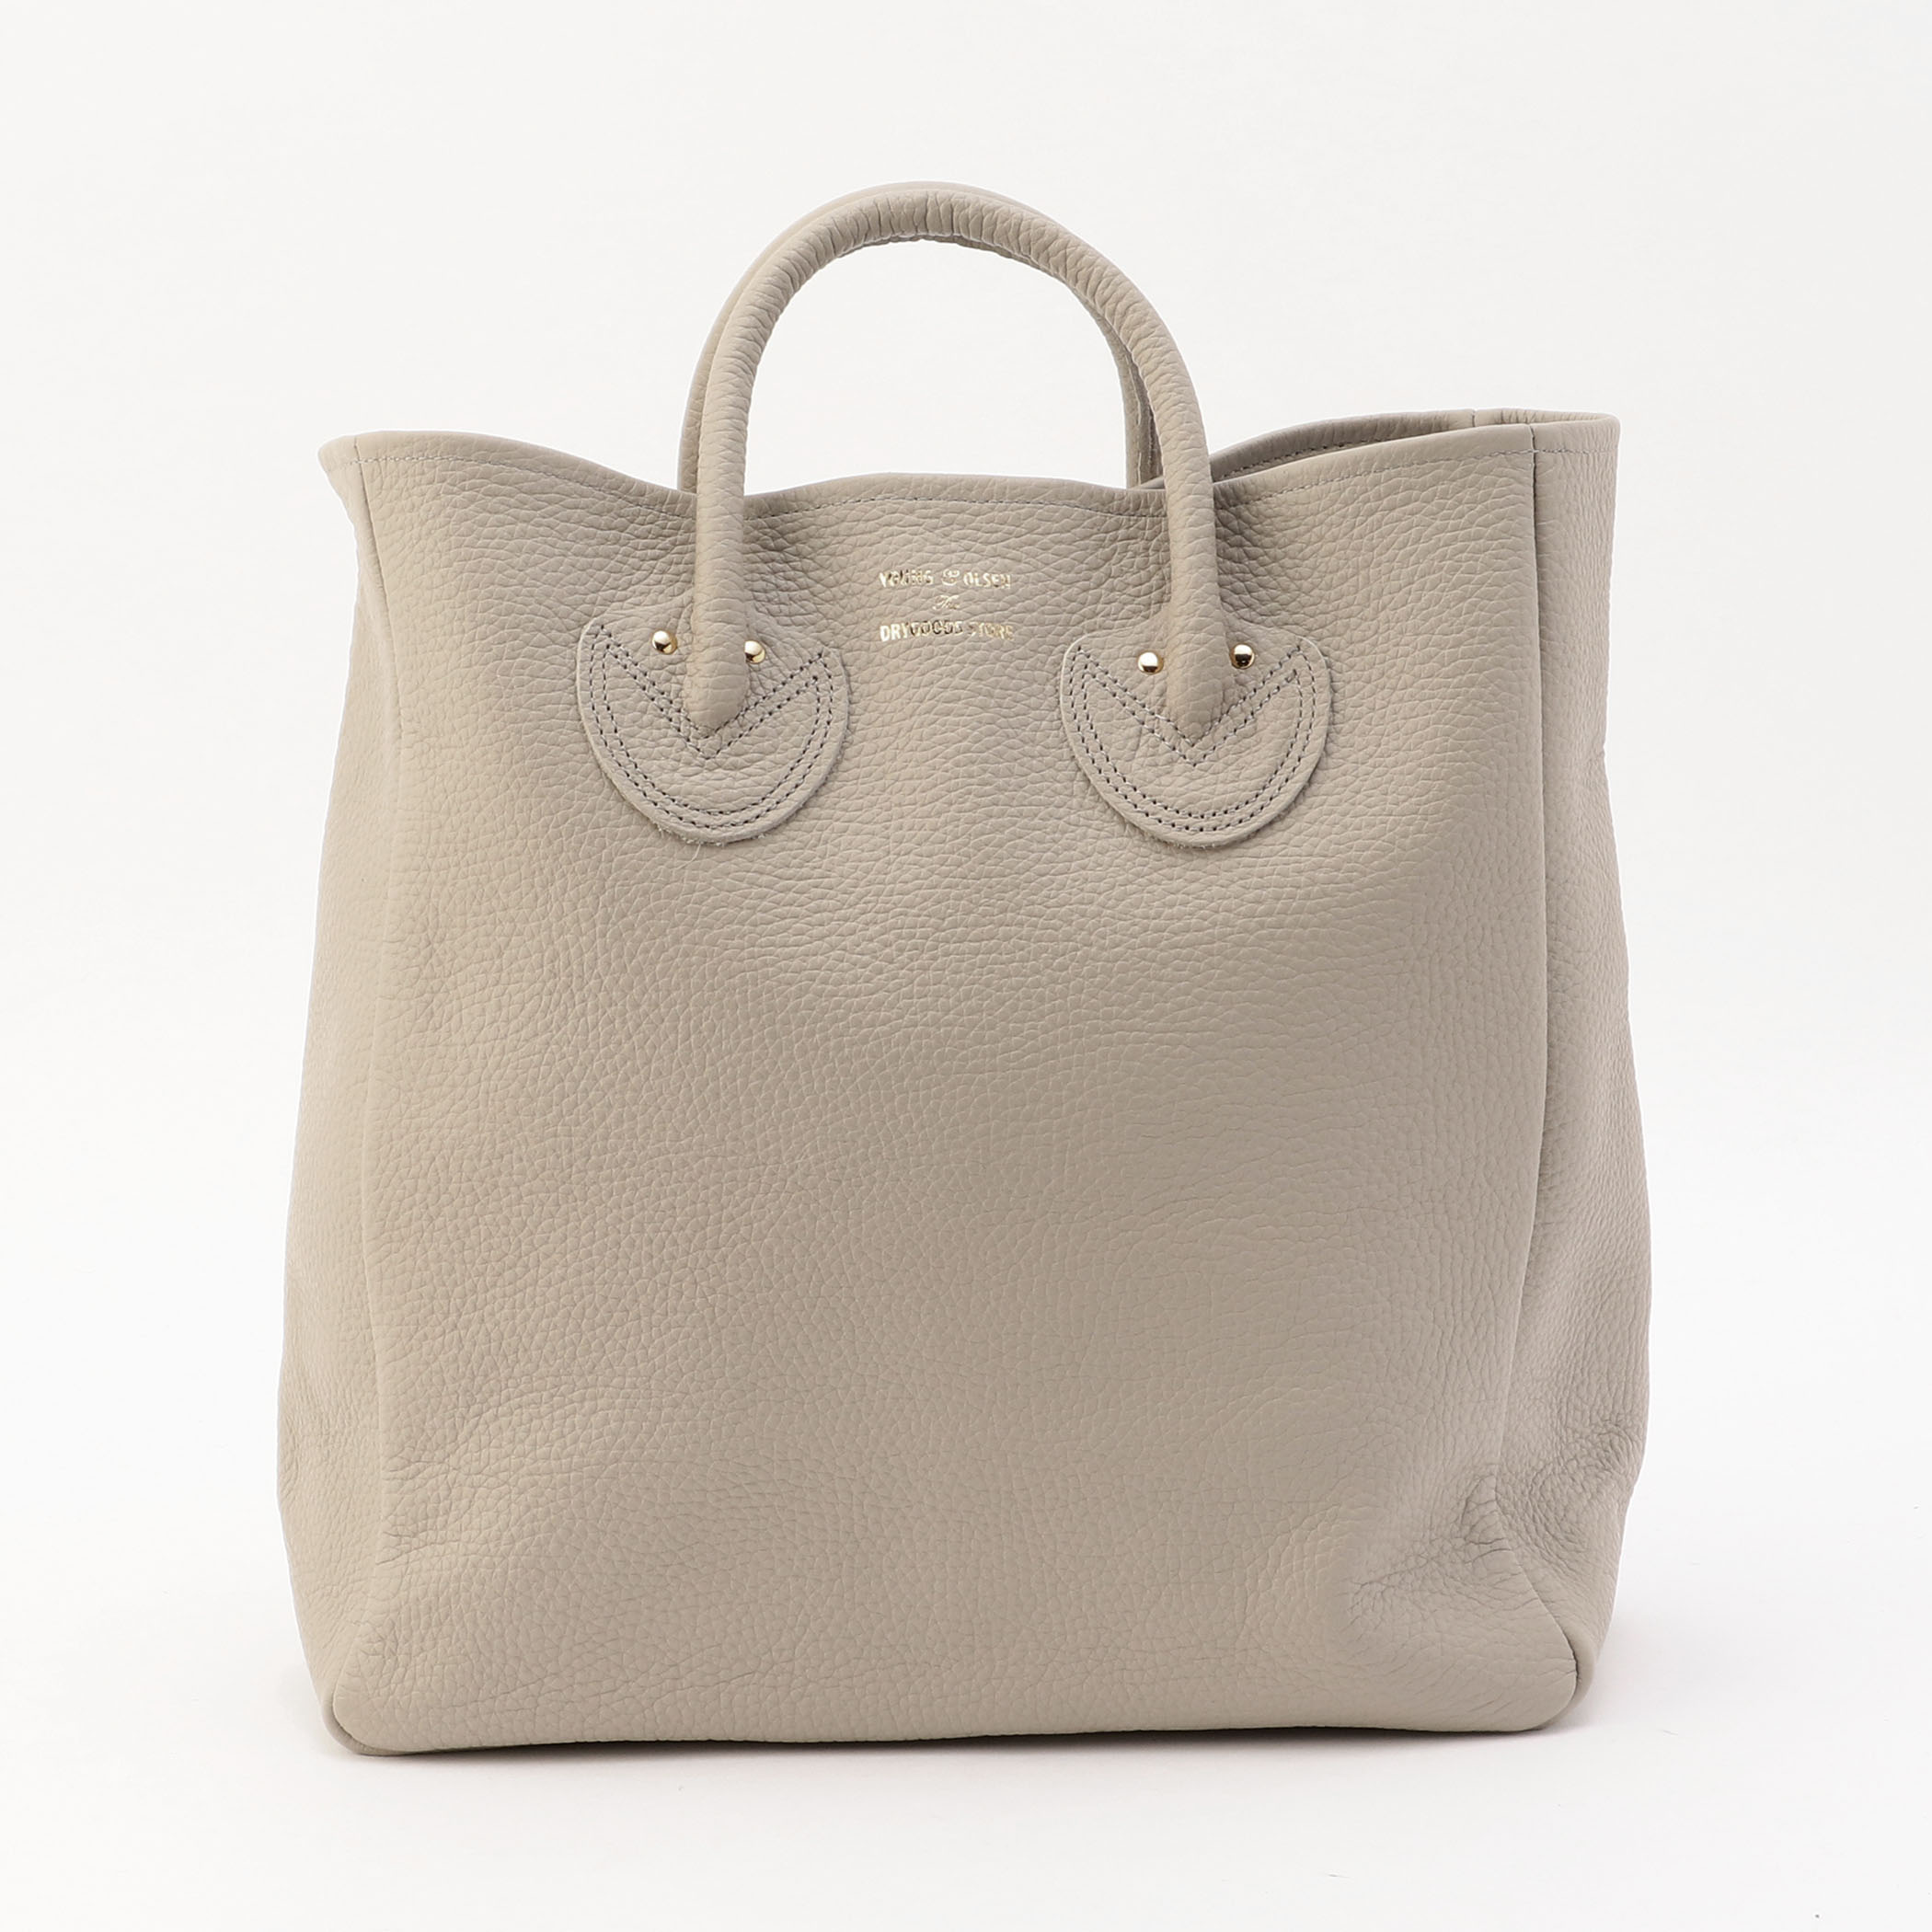 YOUNG&OLSEN ベージュEMBOSSED TOTE M